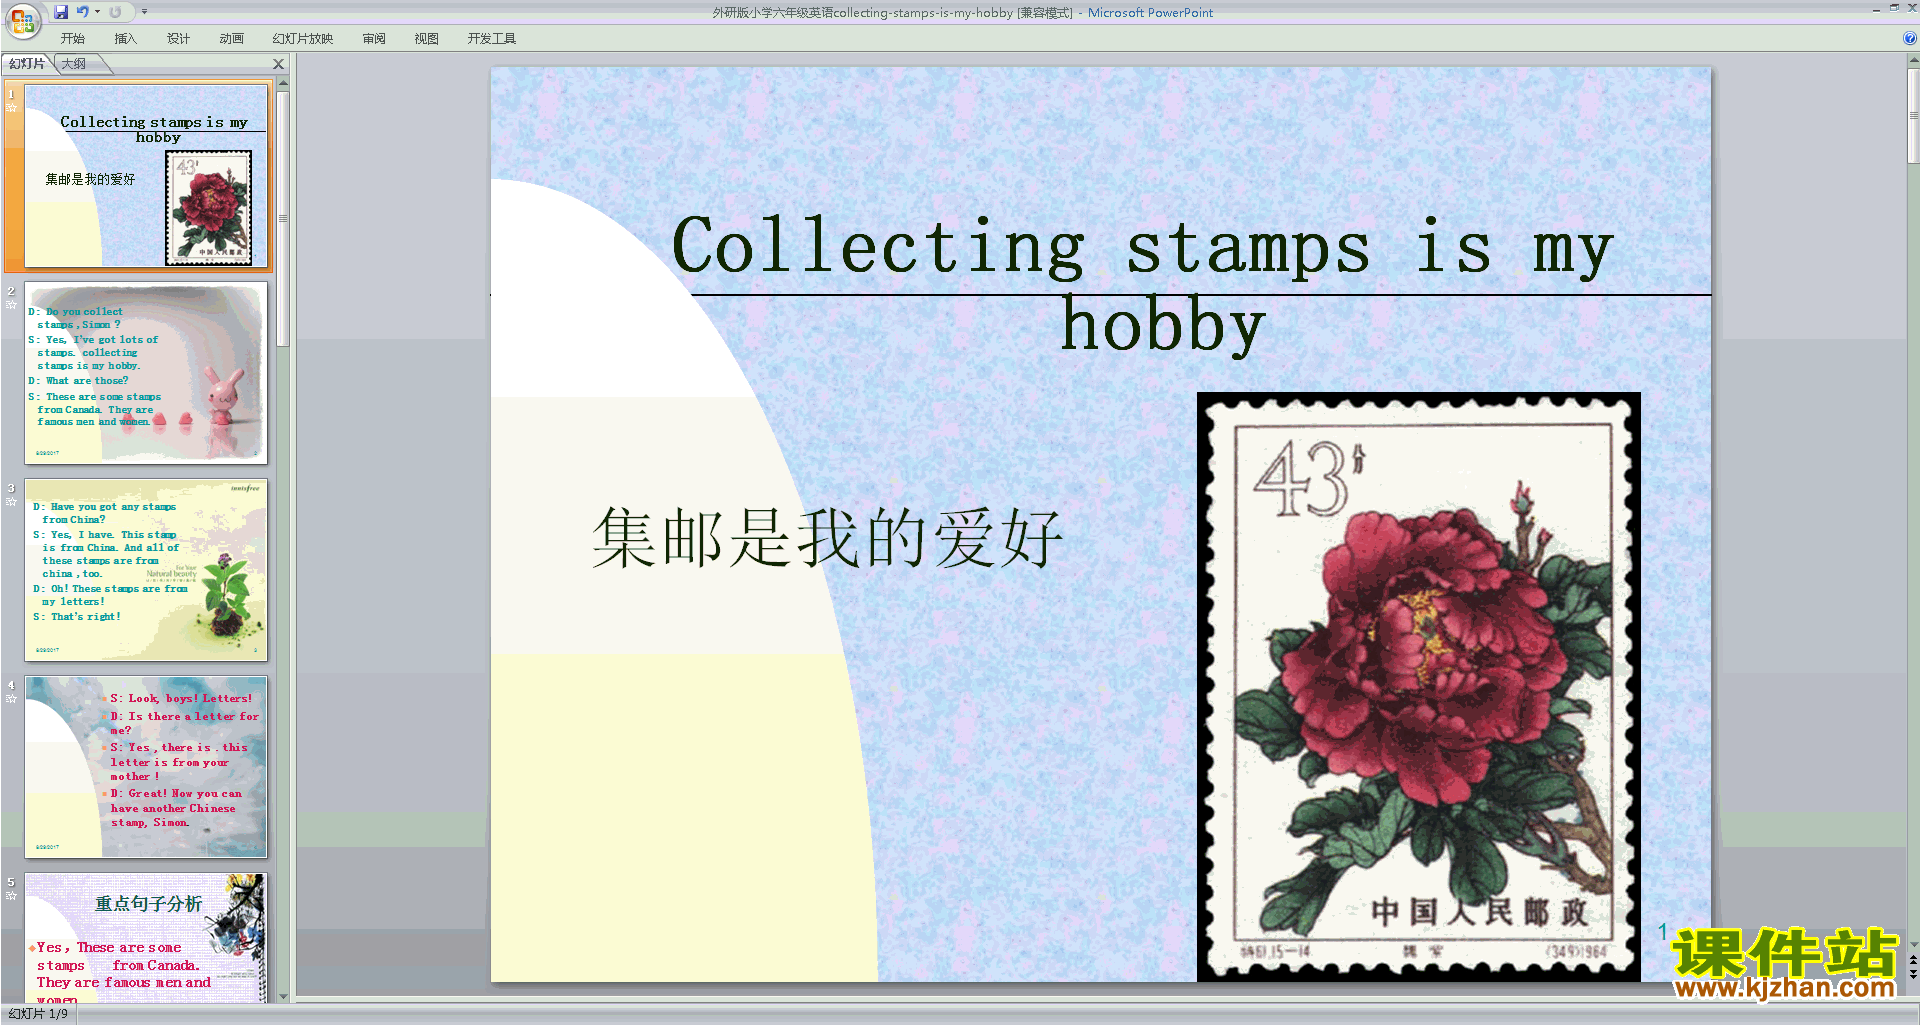 Module3 Unit1 Collecting stamps is my hobbypptμ12